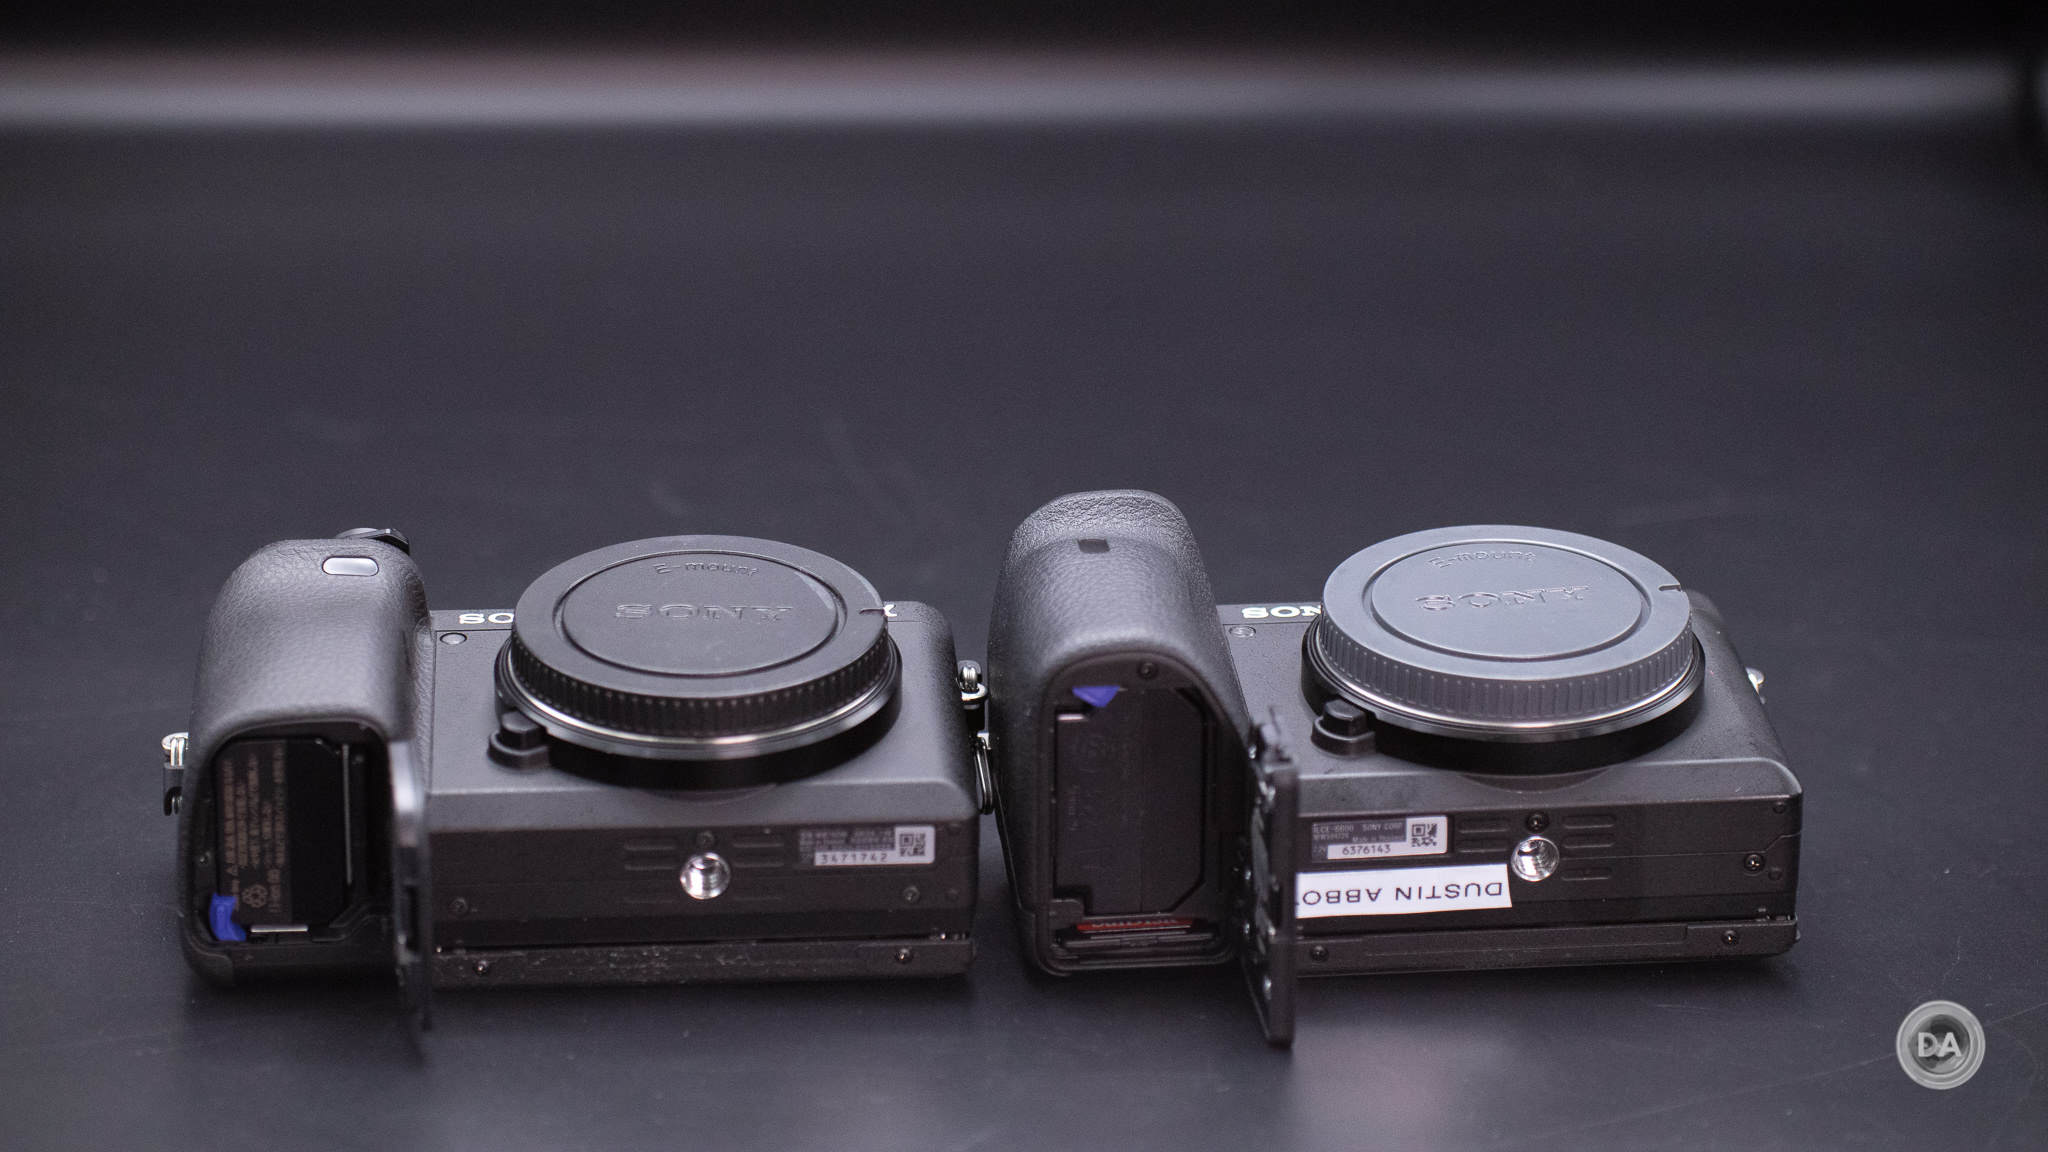 Sony Alpha 6600 Review - UPDATED - Compared With Other Sony Alphas